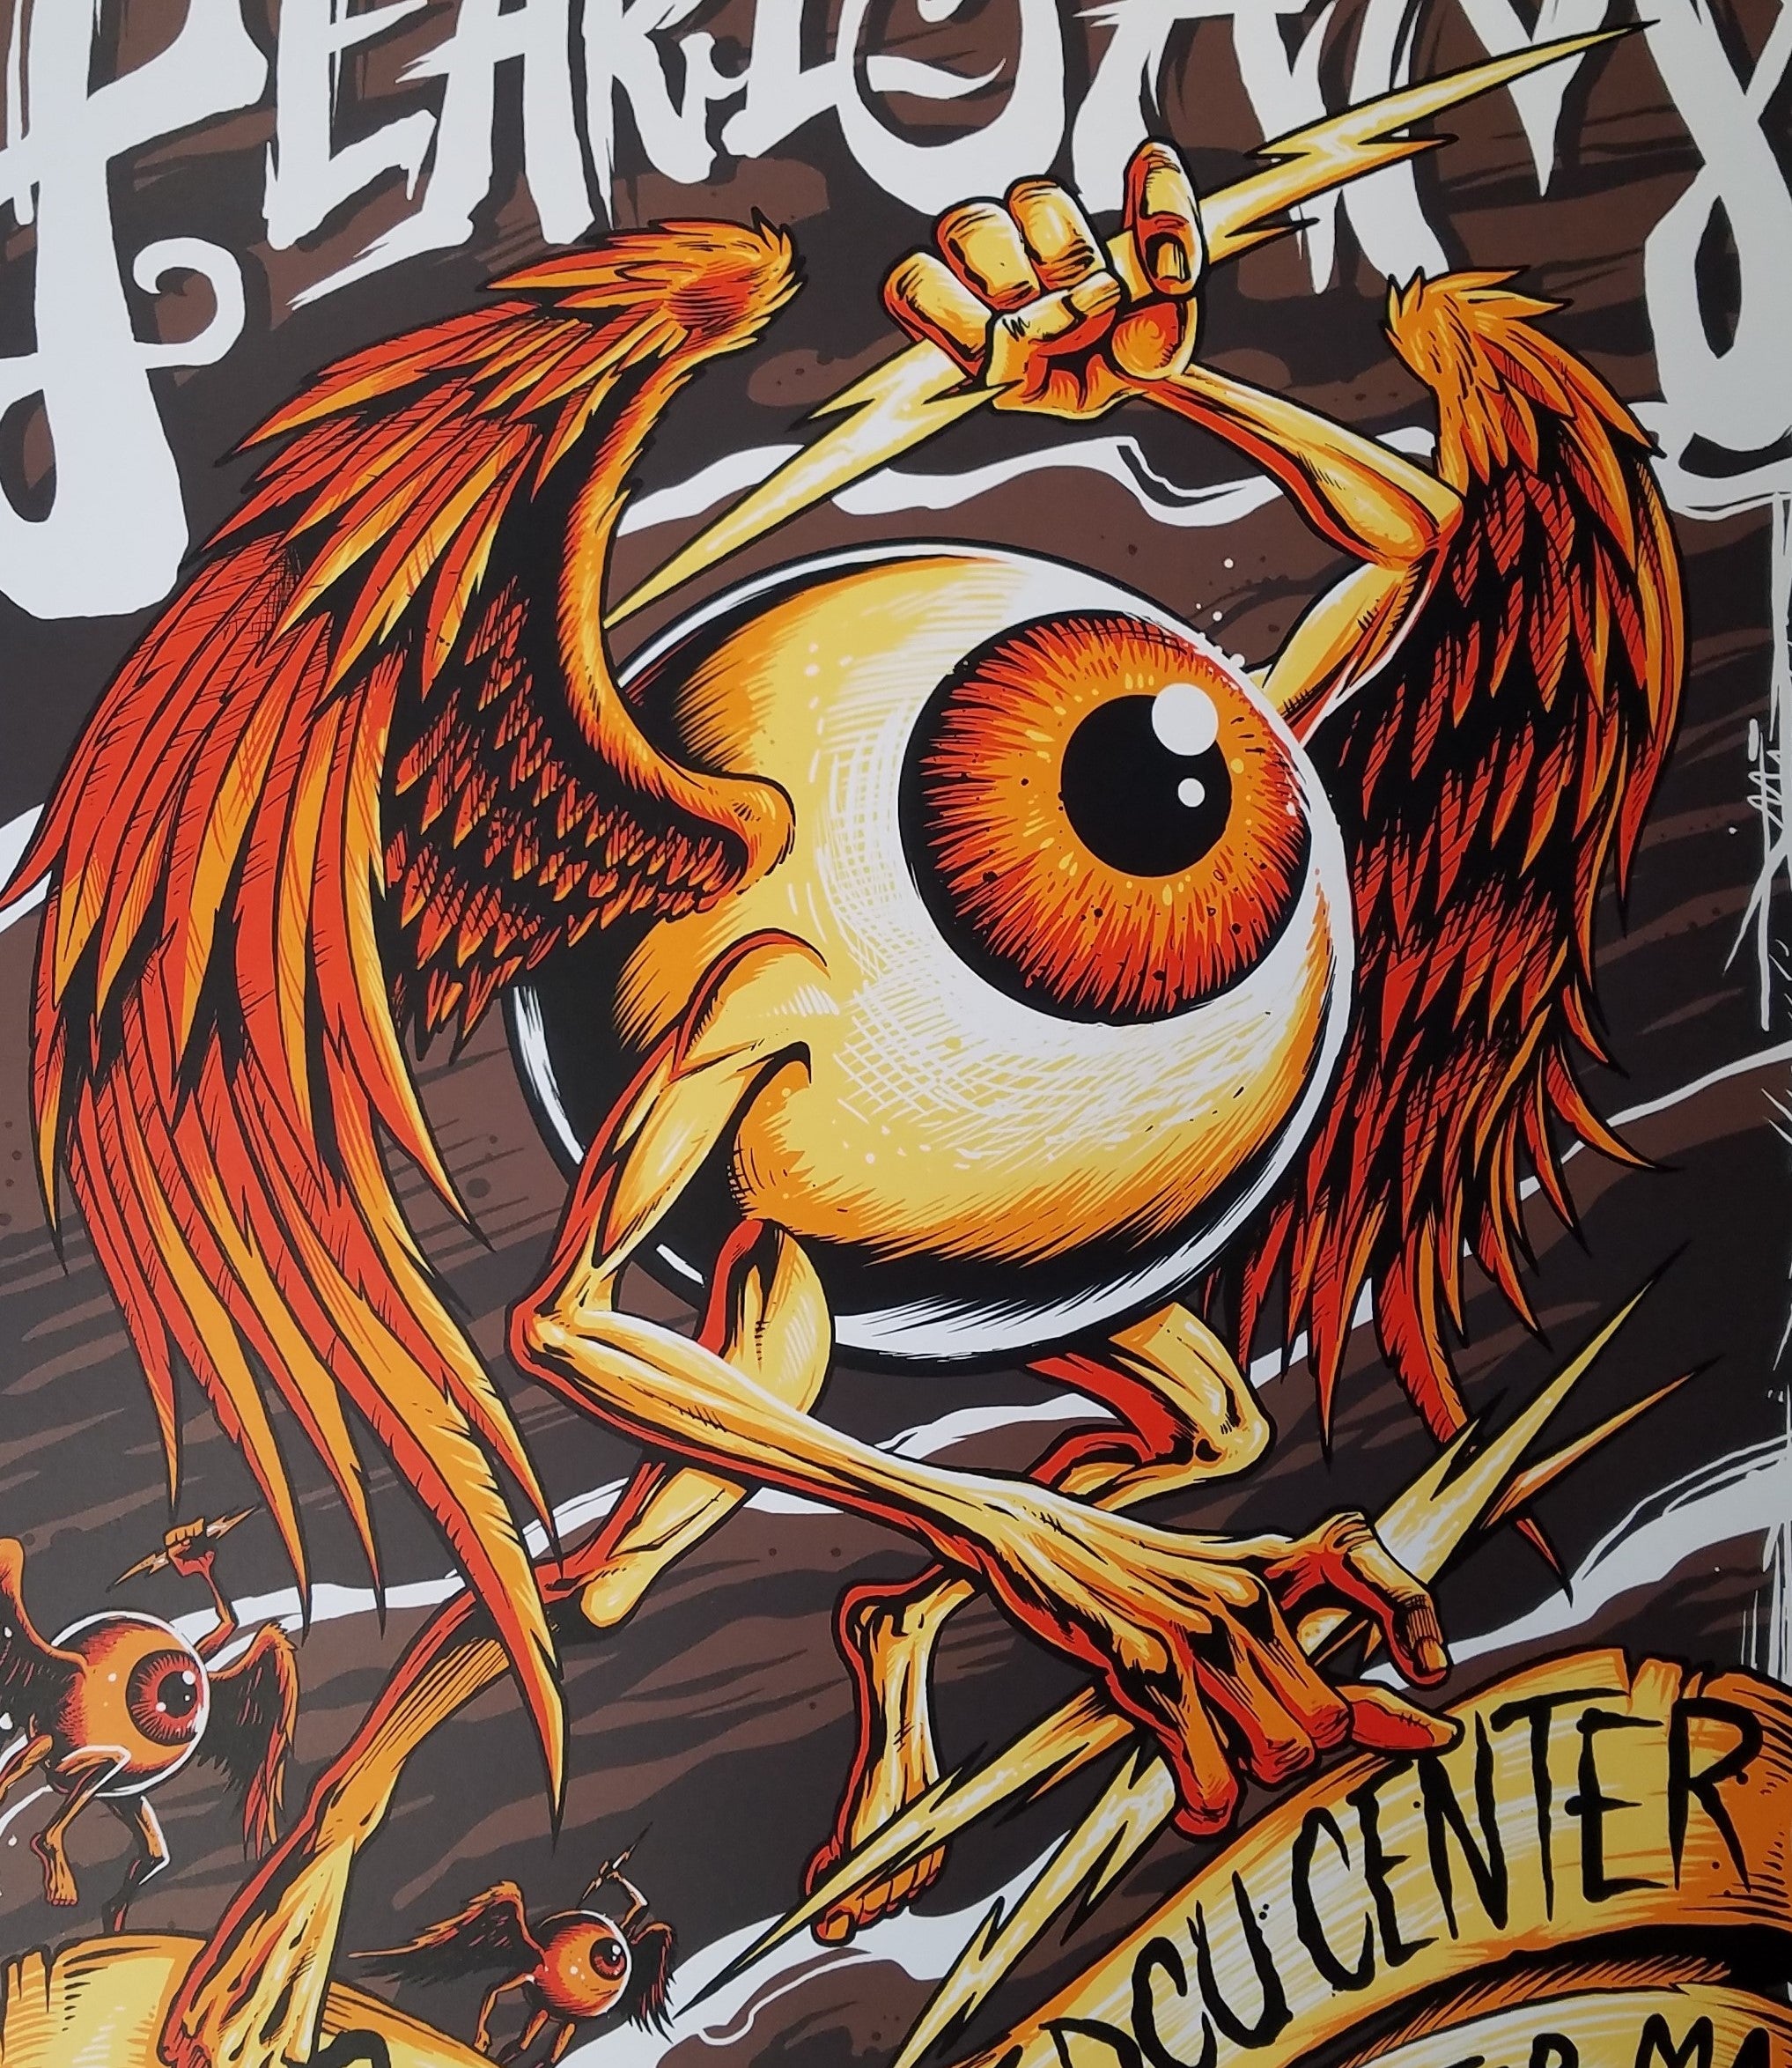 Title:  Pearl Jam - DCU Center 2013 Worcester MA  Artist:  Brandon Heart  Edition:  Limited edition Screen Printed Poster of 100, signed and numbered by the artist  Type:  Screen Print  Size:  18" x 24"  Location:  Worcester, MA  Venue:  DCU Center  Notes:  This beautiful 6-color screen print for Pearl Jam’s October 15th show at the DCU Center in Worcester, MA pays homage to legendary psychedelic poster artist Rick Griffin's "flying eyeball" and remains in perfect condition.